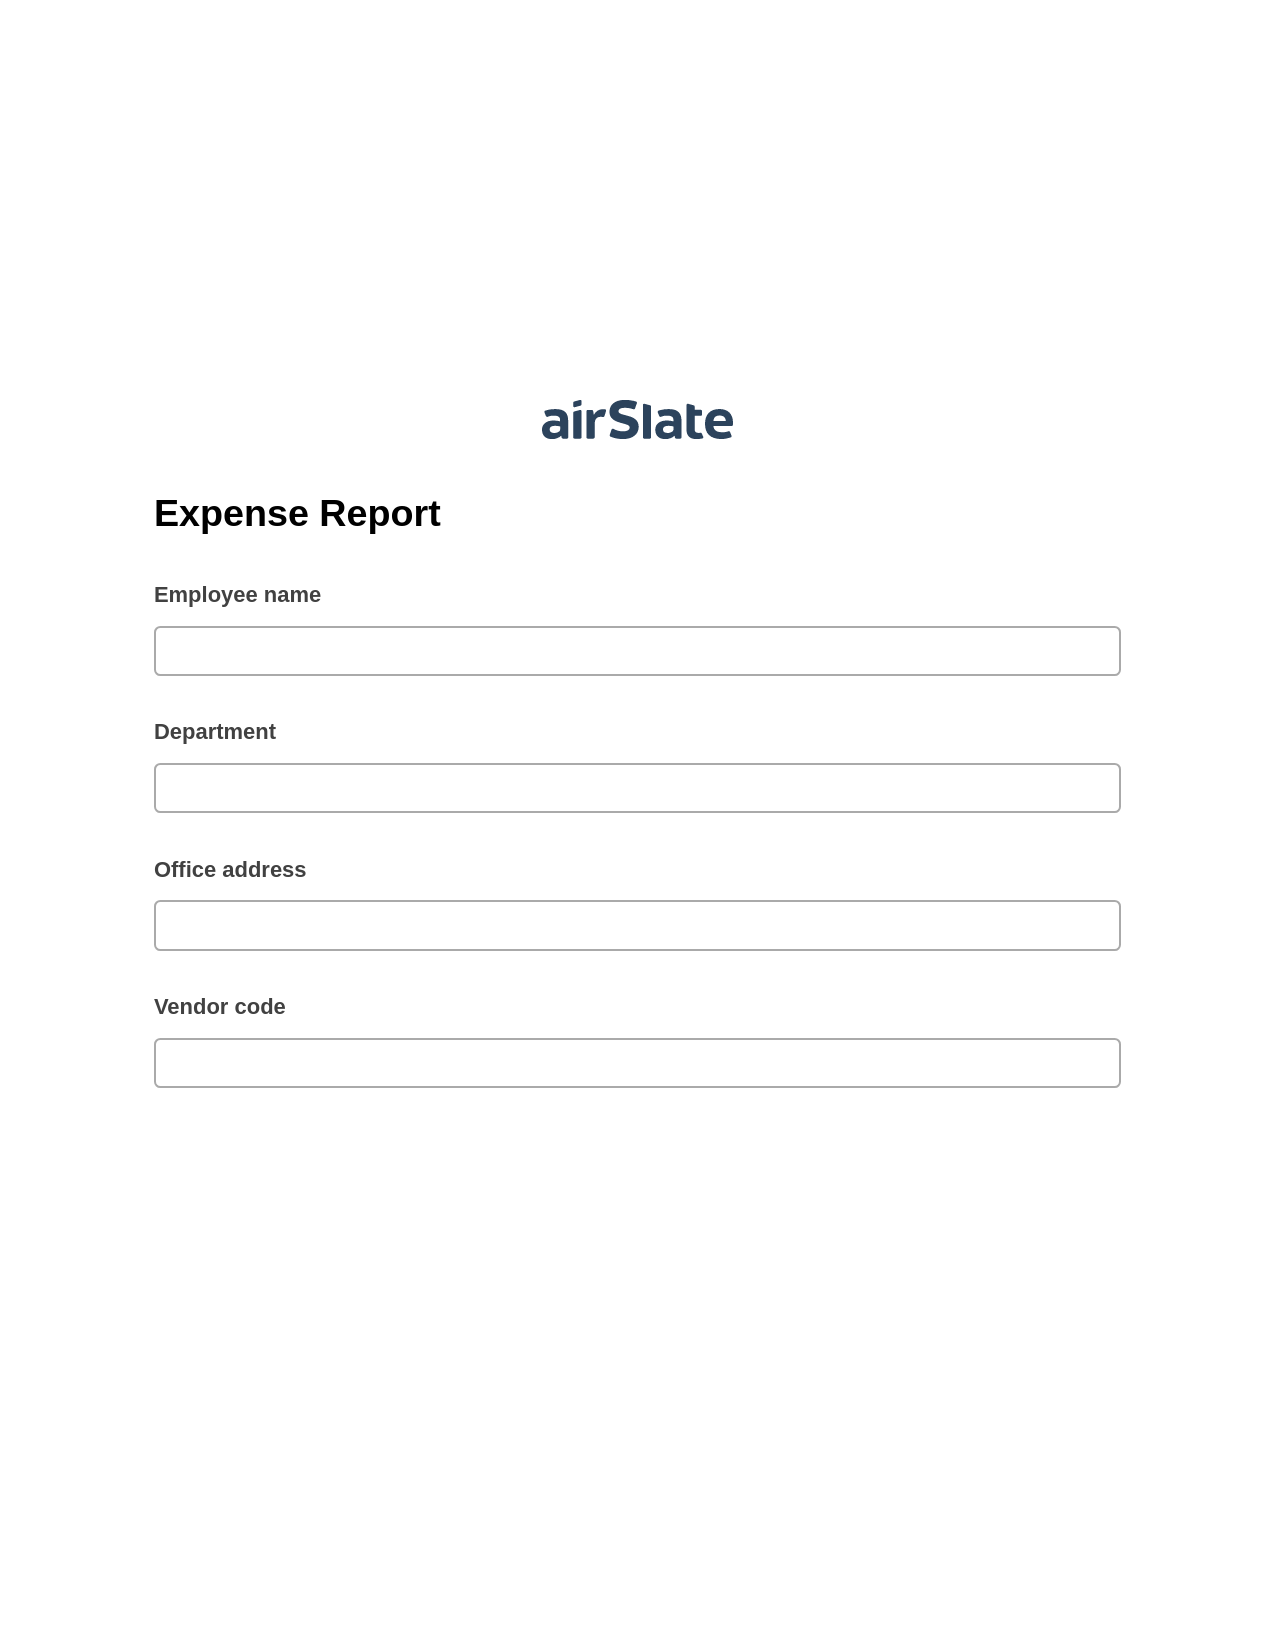 Multirole Expense Report Pre-fill Dropdown from Airtable, Update Salesforce Record Bot, Archive to SharePoint Folder Bot